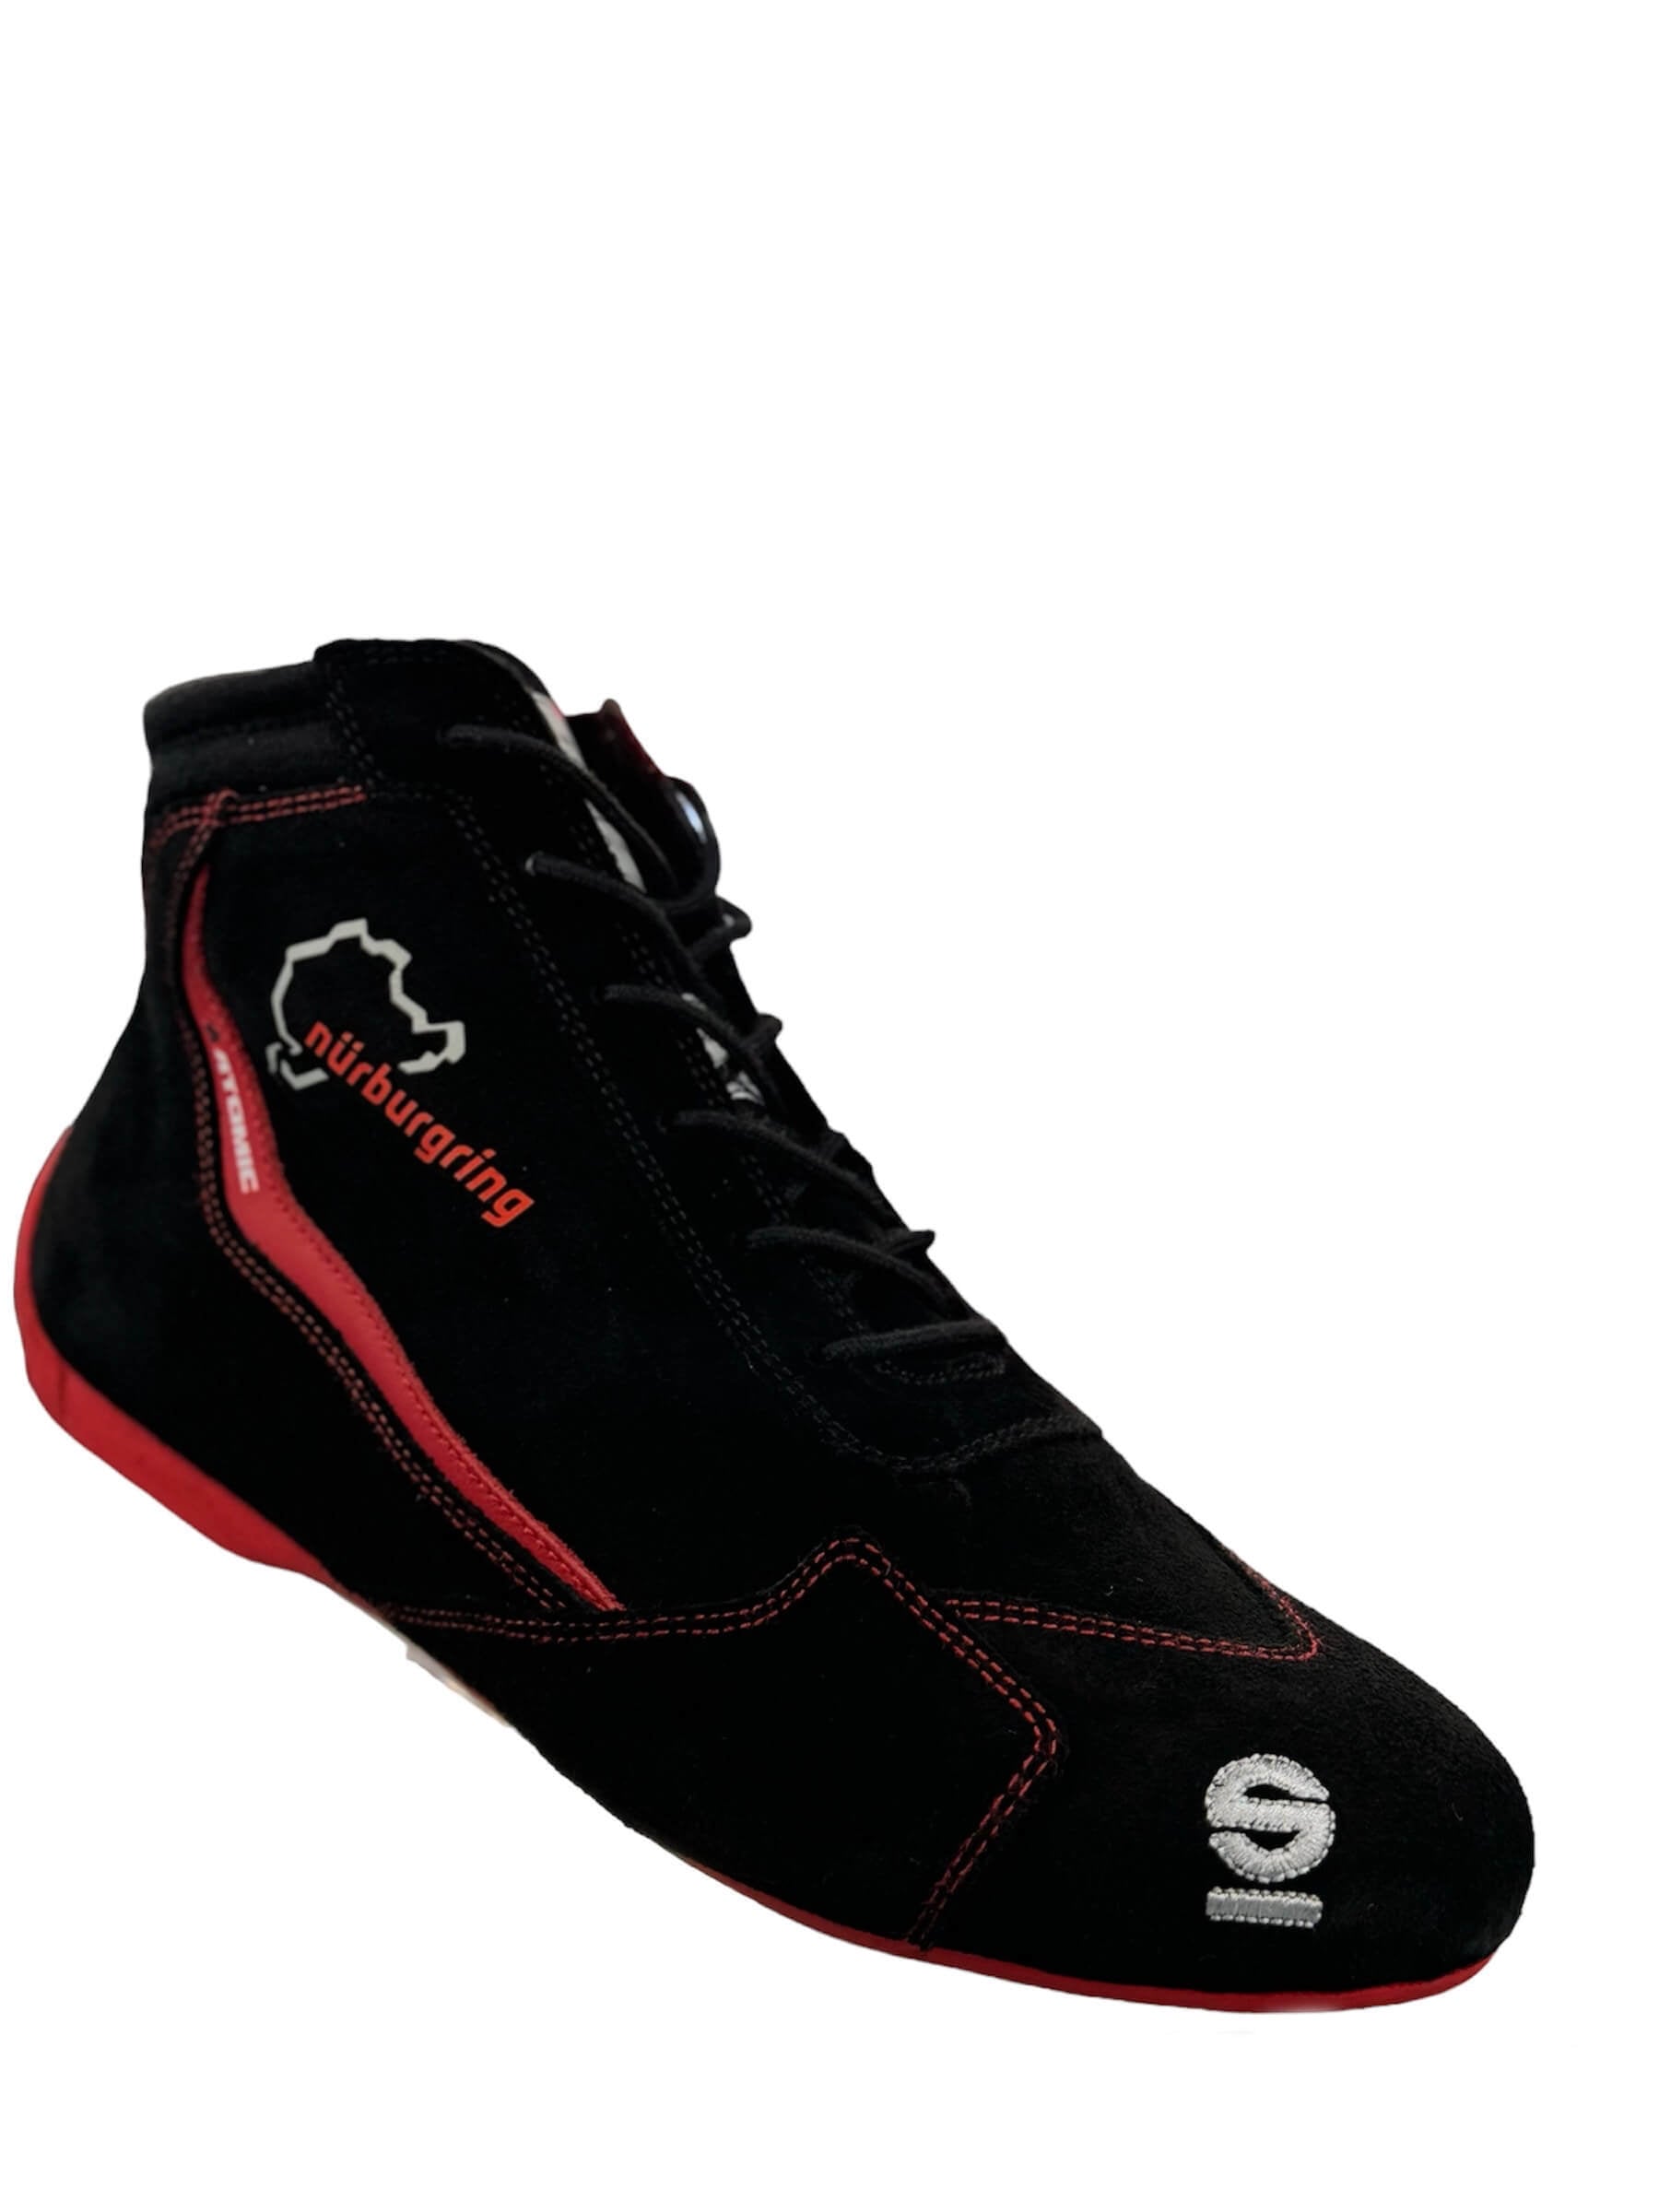 SPARCO 001295SP_NBR43 Shoes Slalom Nurburgring Edition black/red Size 43 Photo-0 